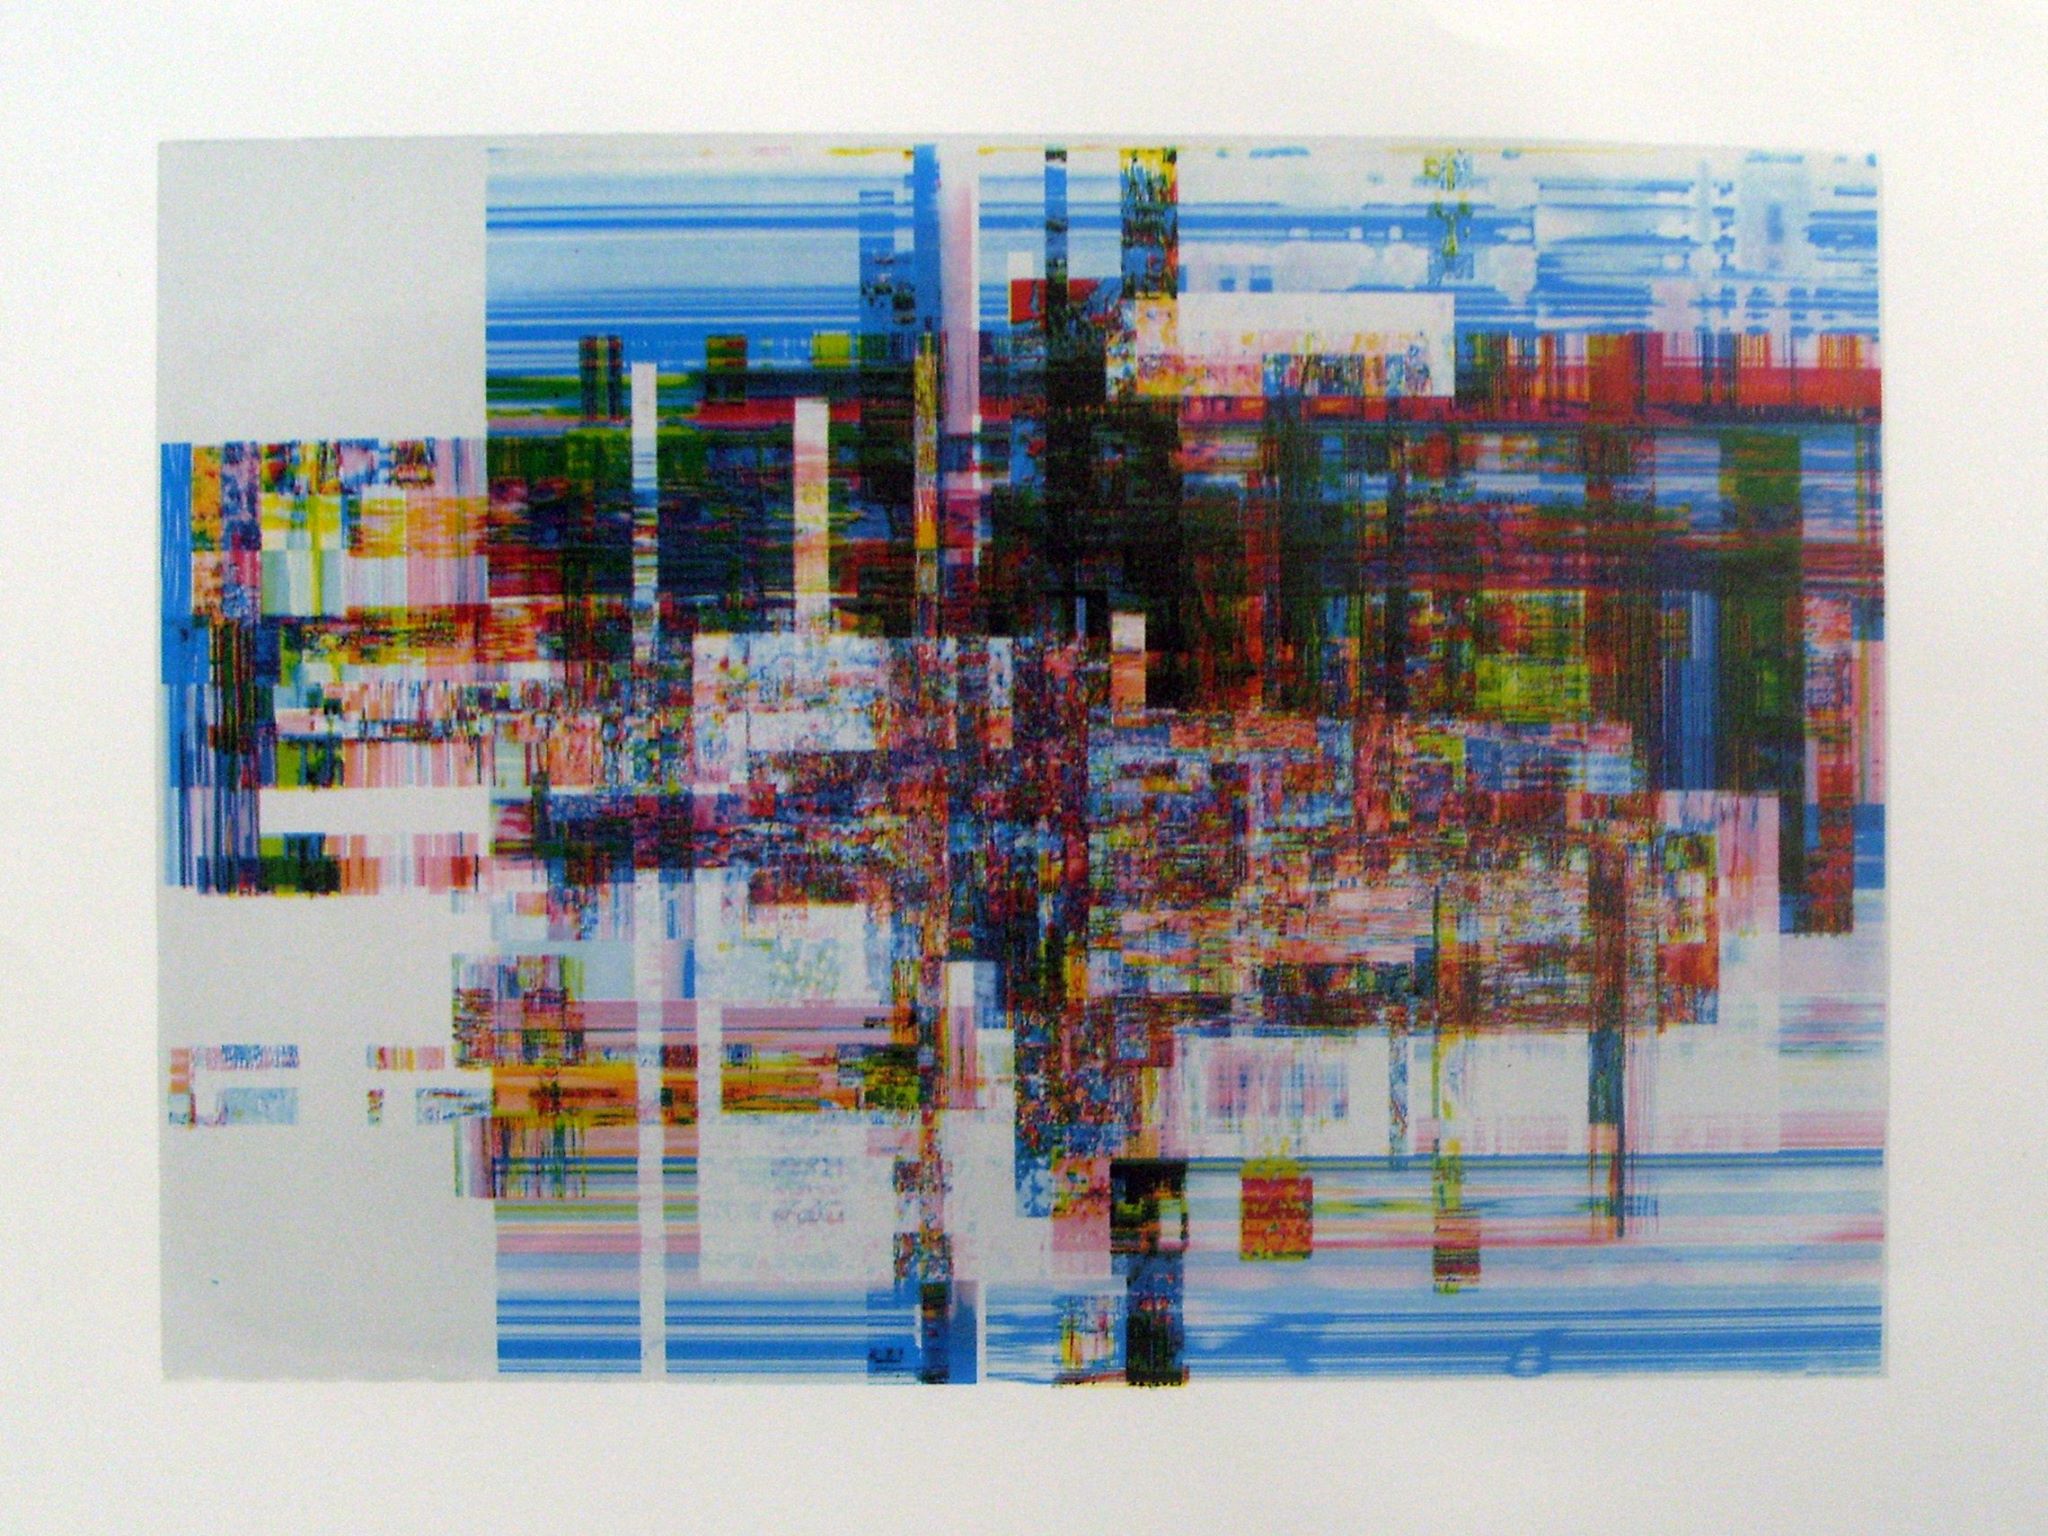 Four color separation screenprint with silver translucent layer. Image created from augmented and stretched pixels on the computer.